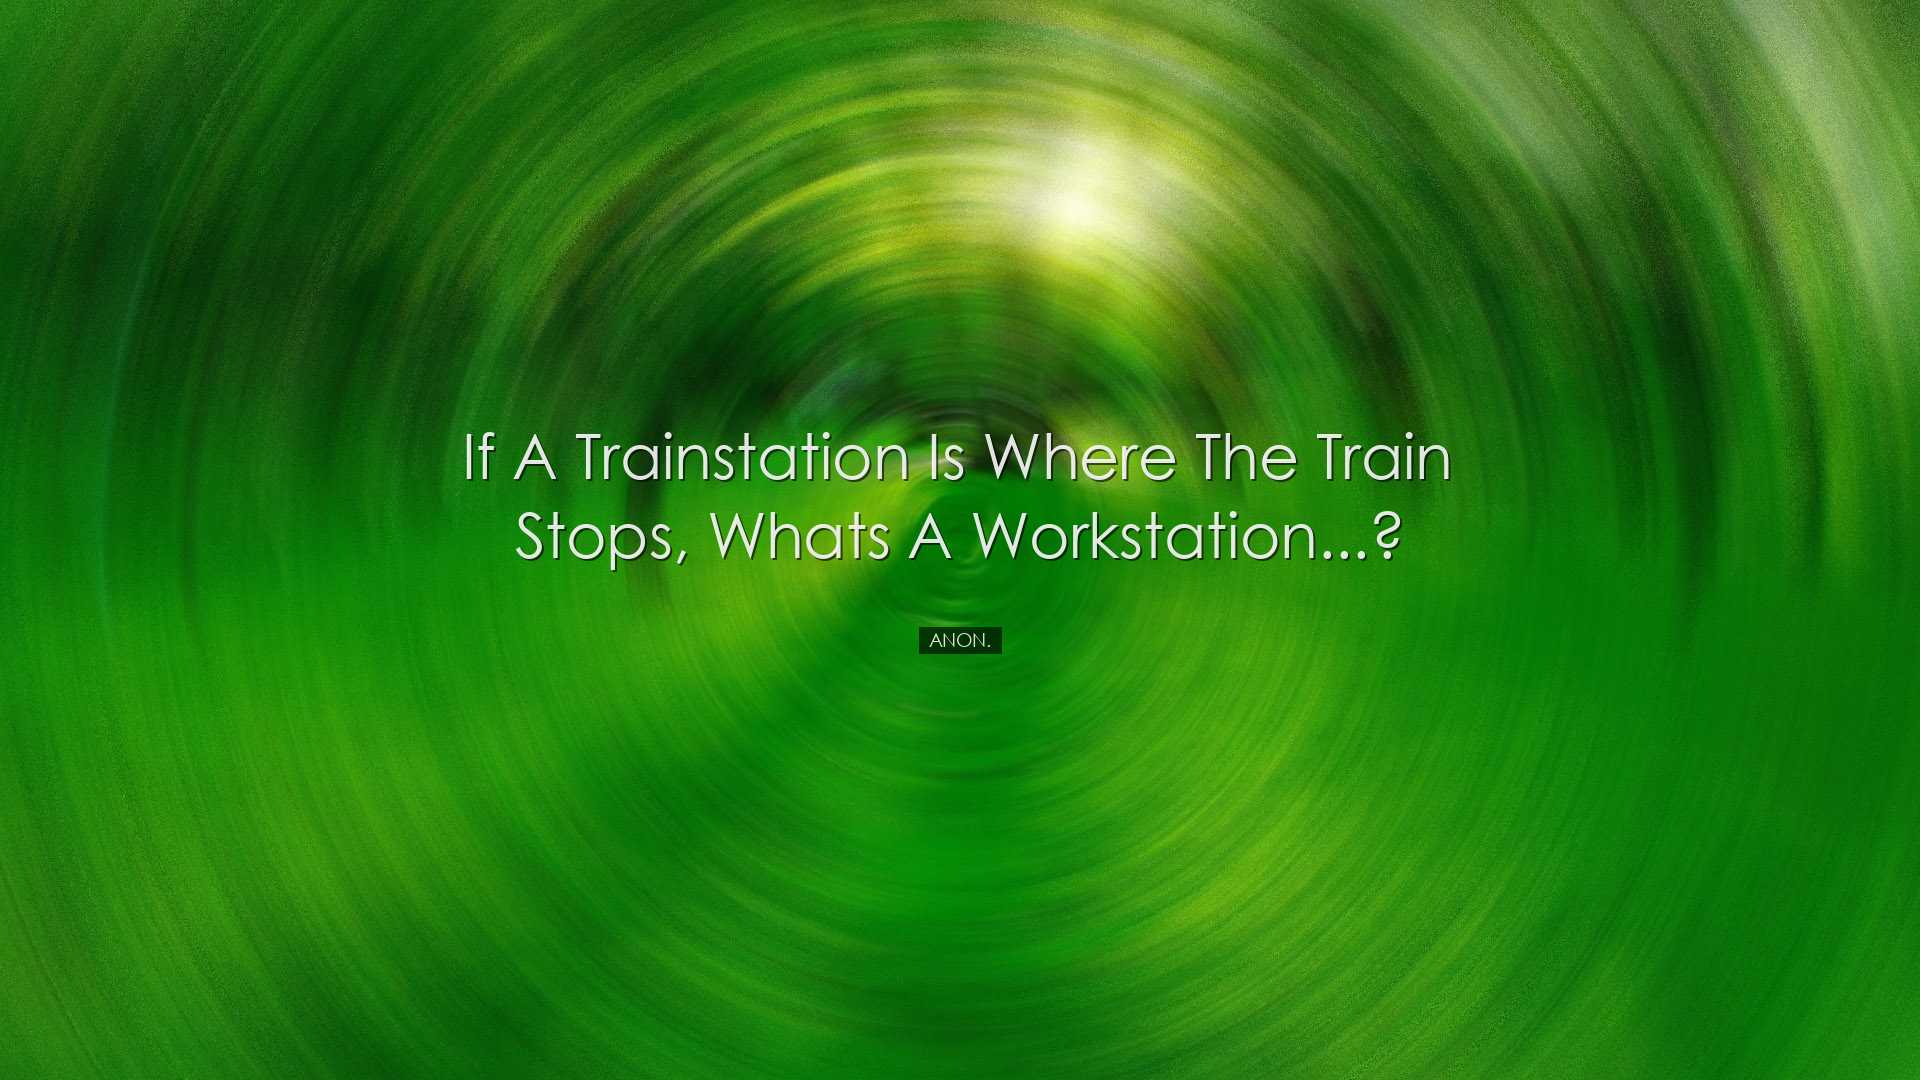 If a trainstation is where the train stops, whats a workstation...